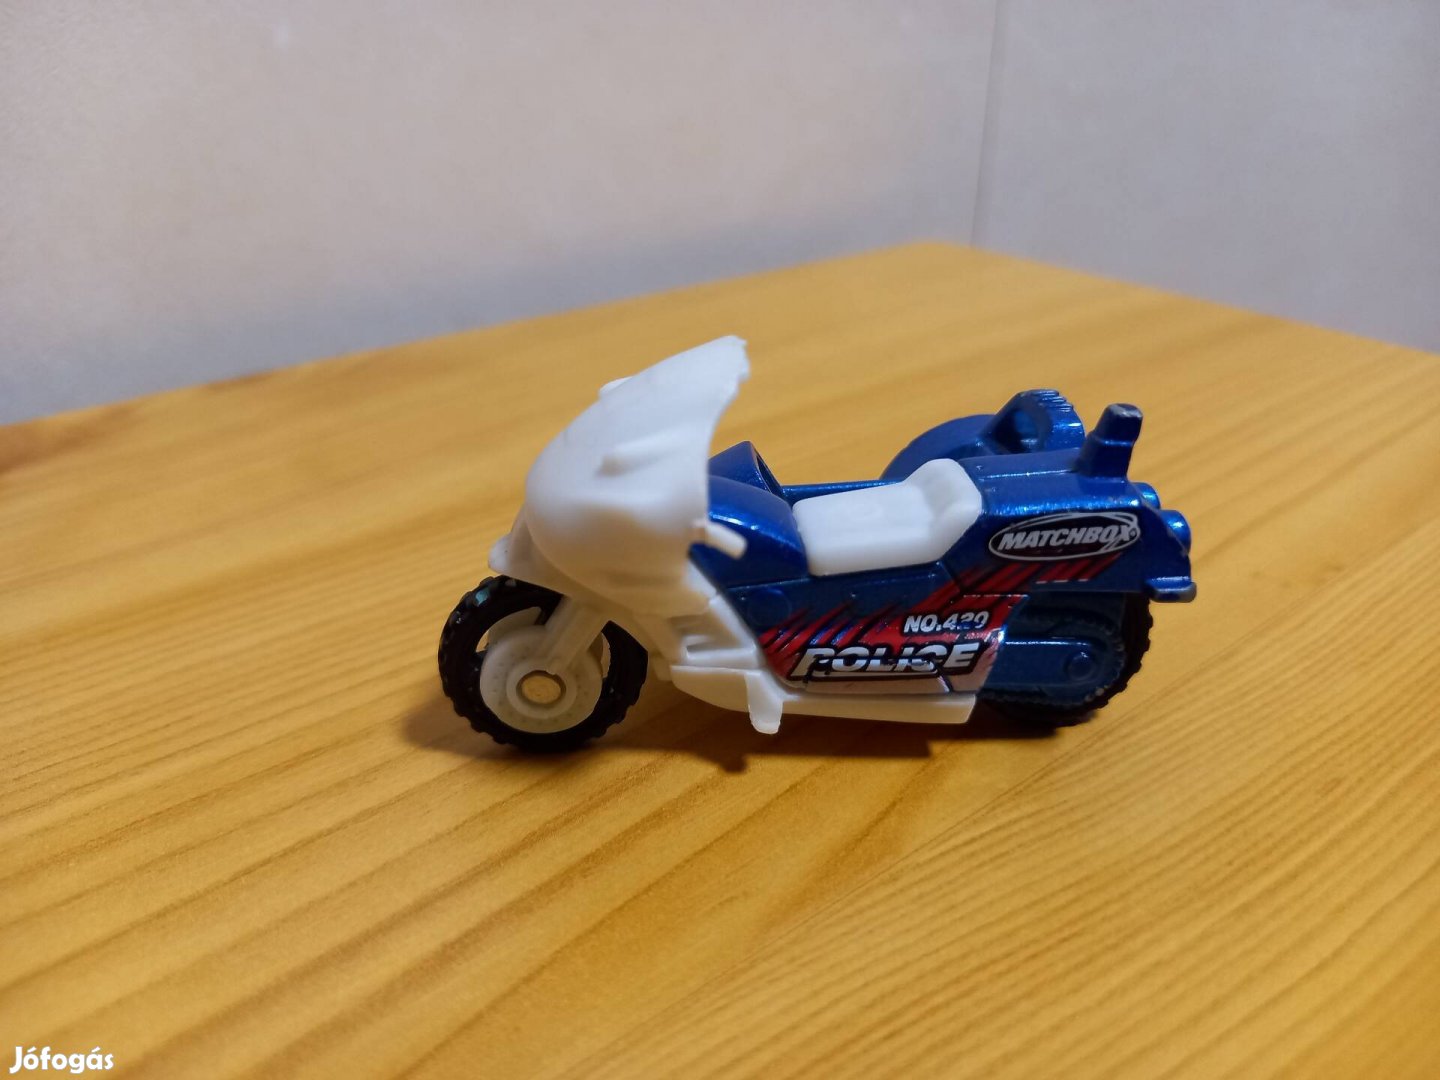 Matchbox Cycle with Sidecar - 2001